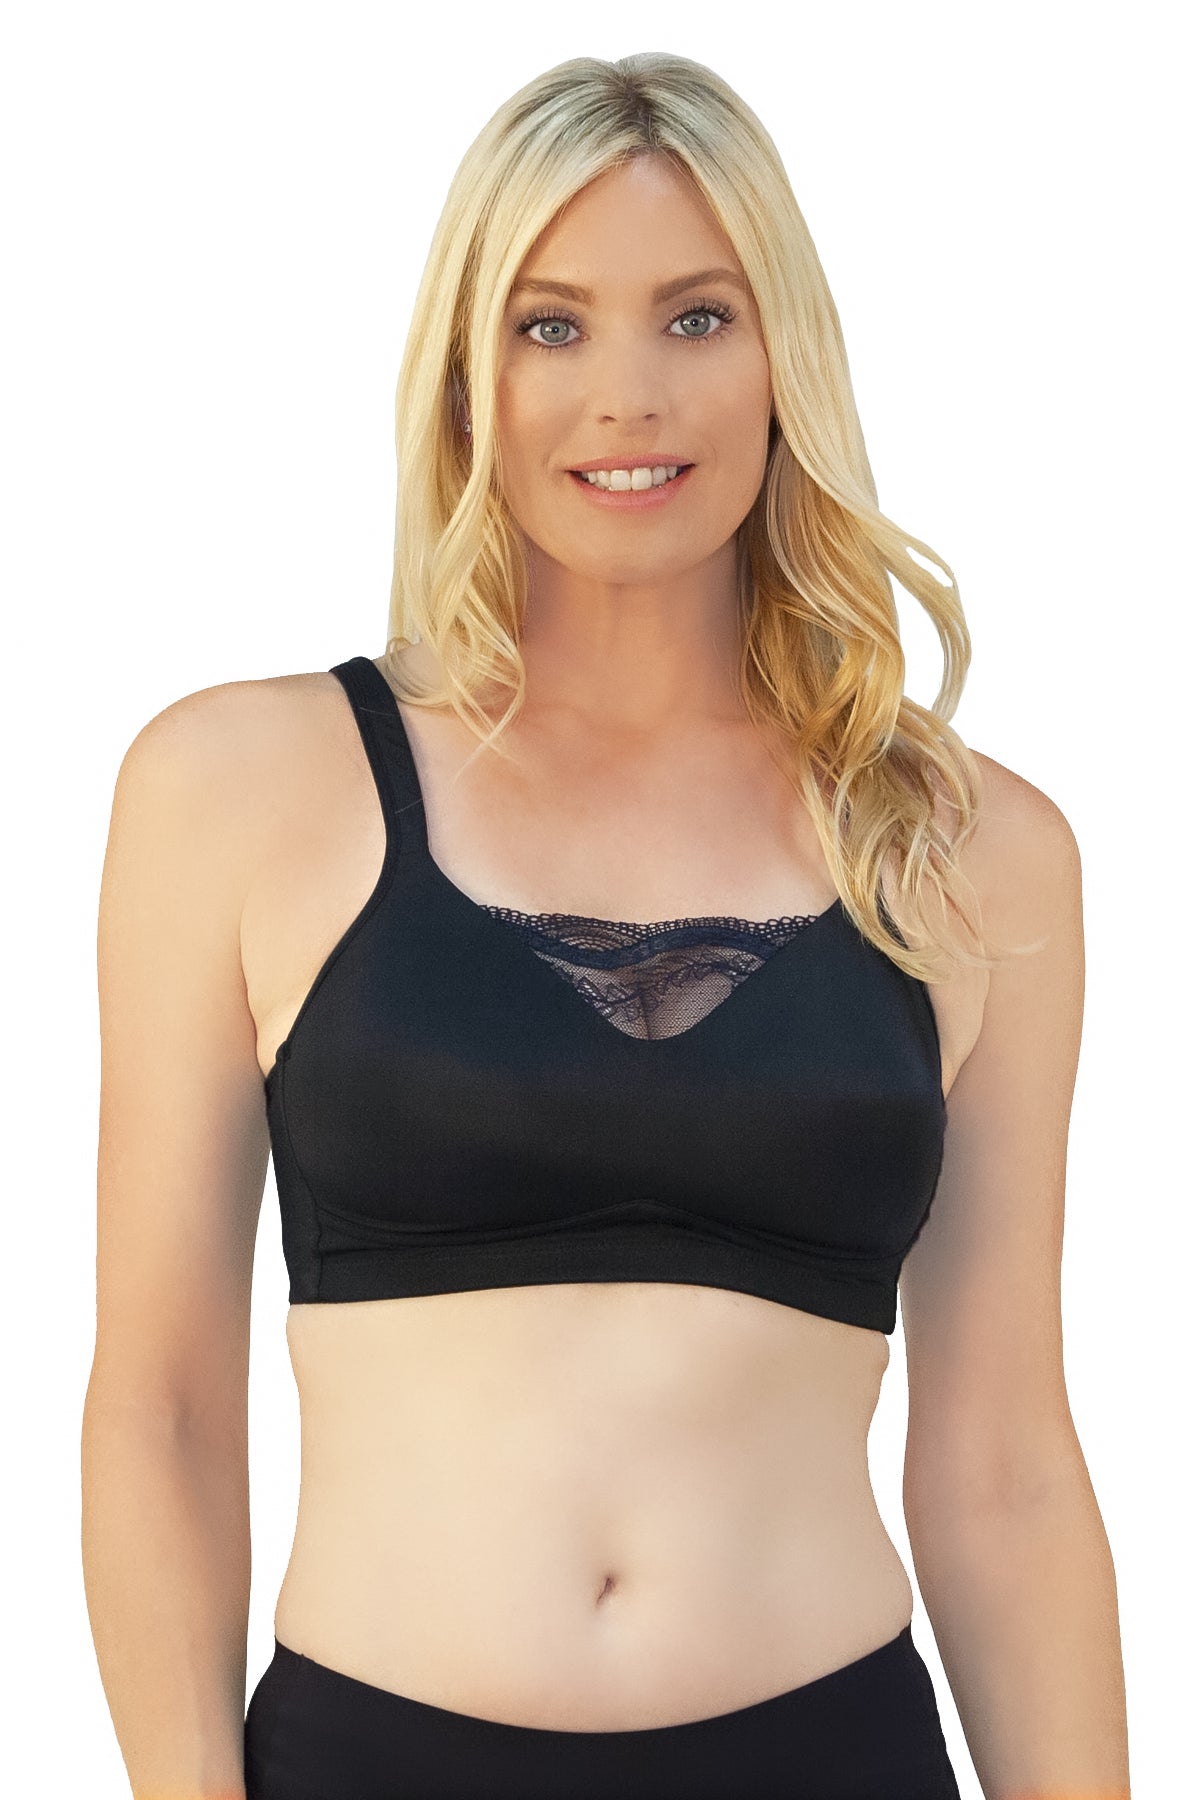 Molded Cup Bra with Lace Inset, Bras